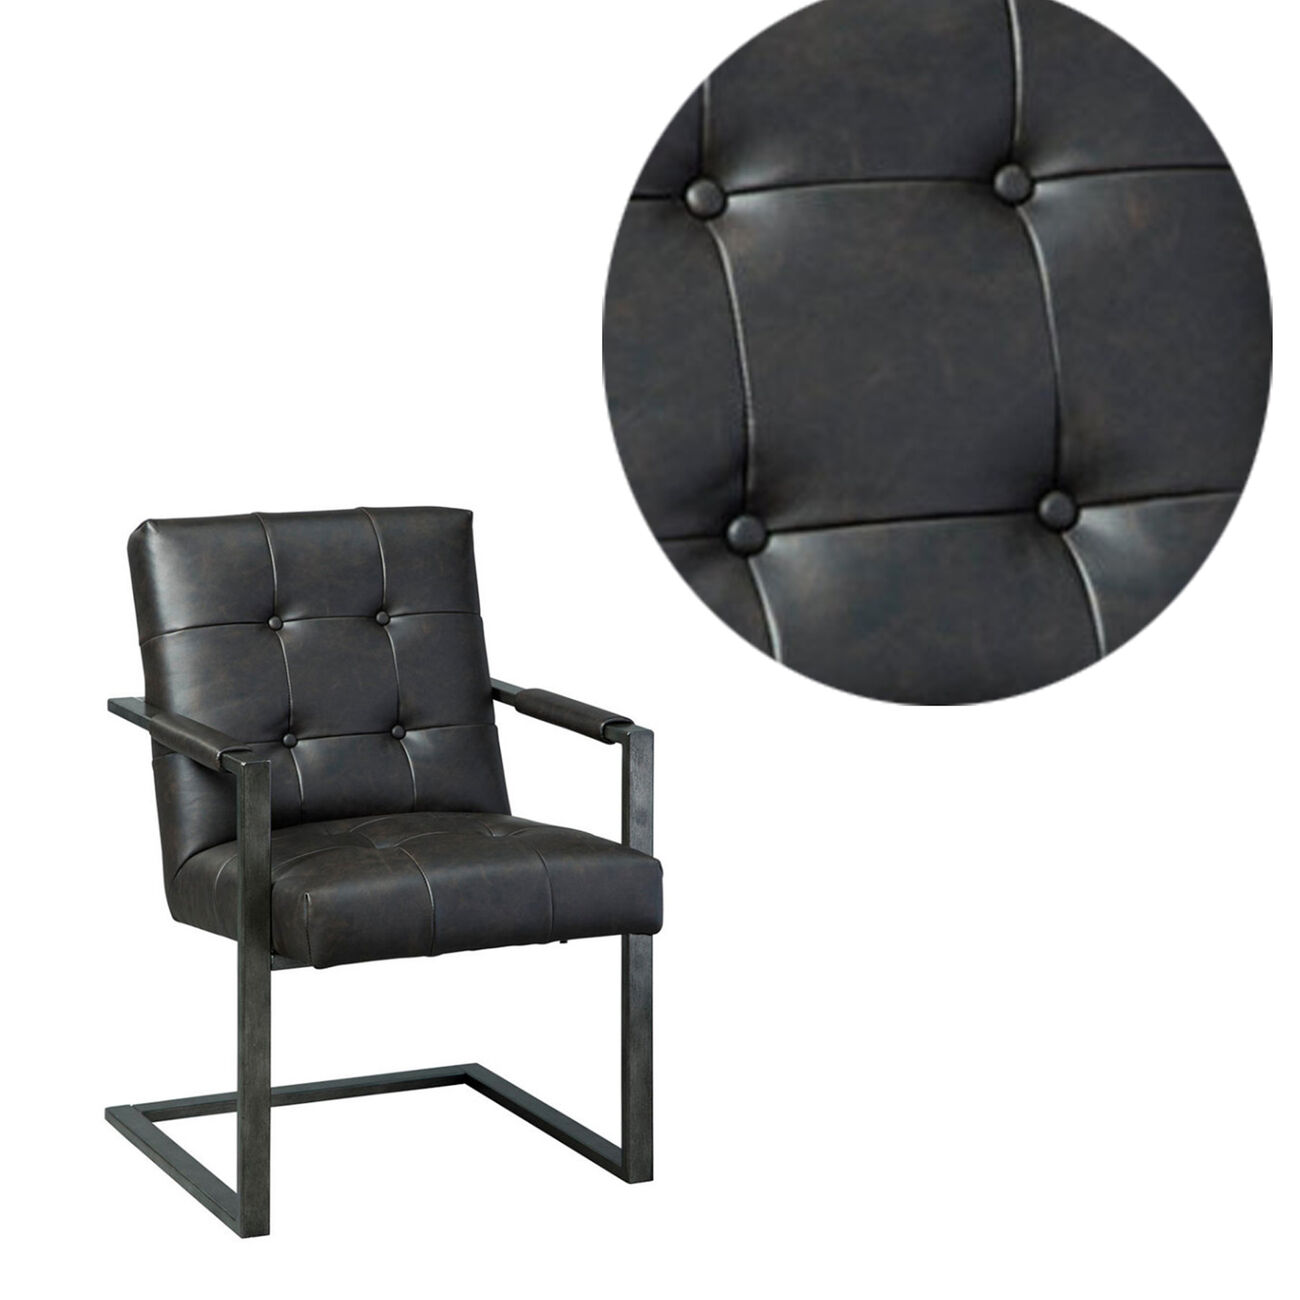 Button Tufted Leatherette Chair with C frame Metal Base, Set of Two, Black and Gray